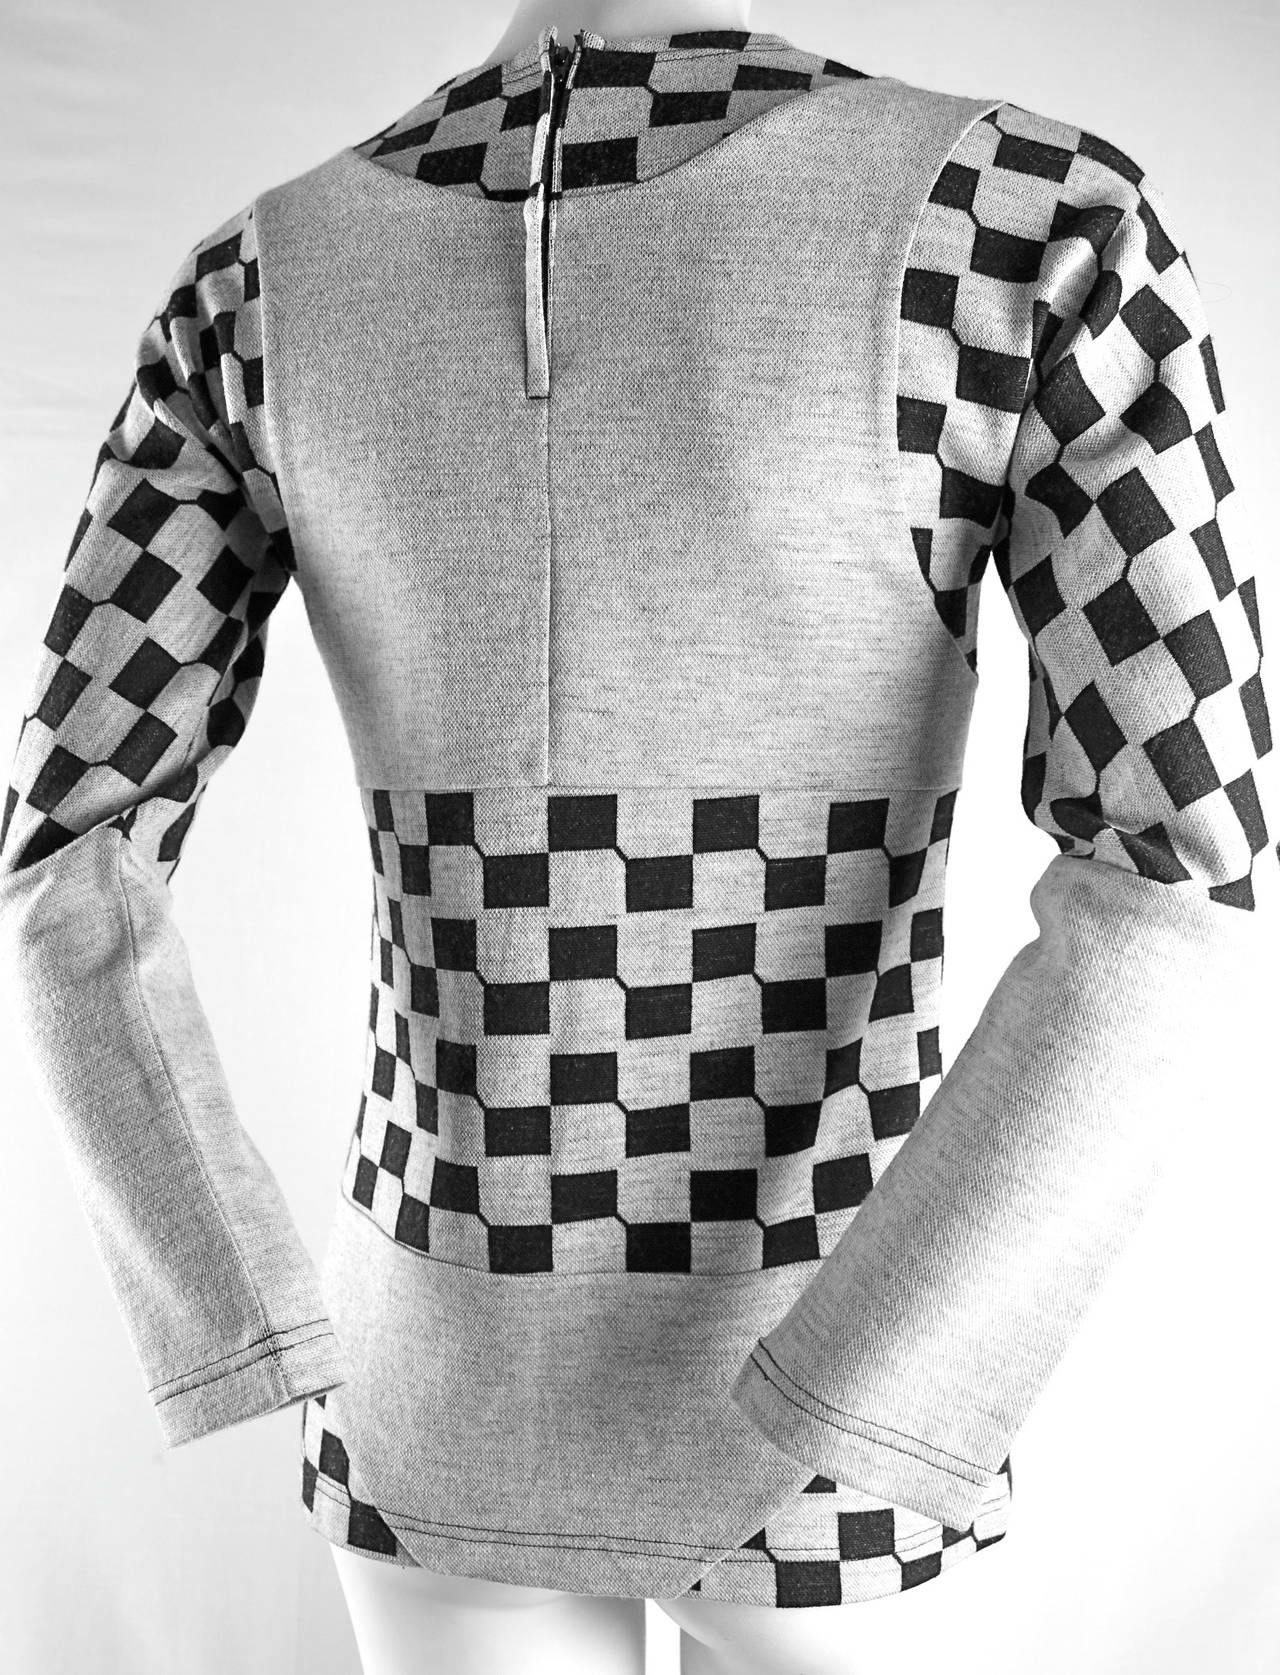 Peggy Moffitt for Comme des Garcons Collection
Grey and Black Checkerboard Bikini Top
Labelled size M